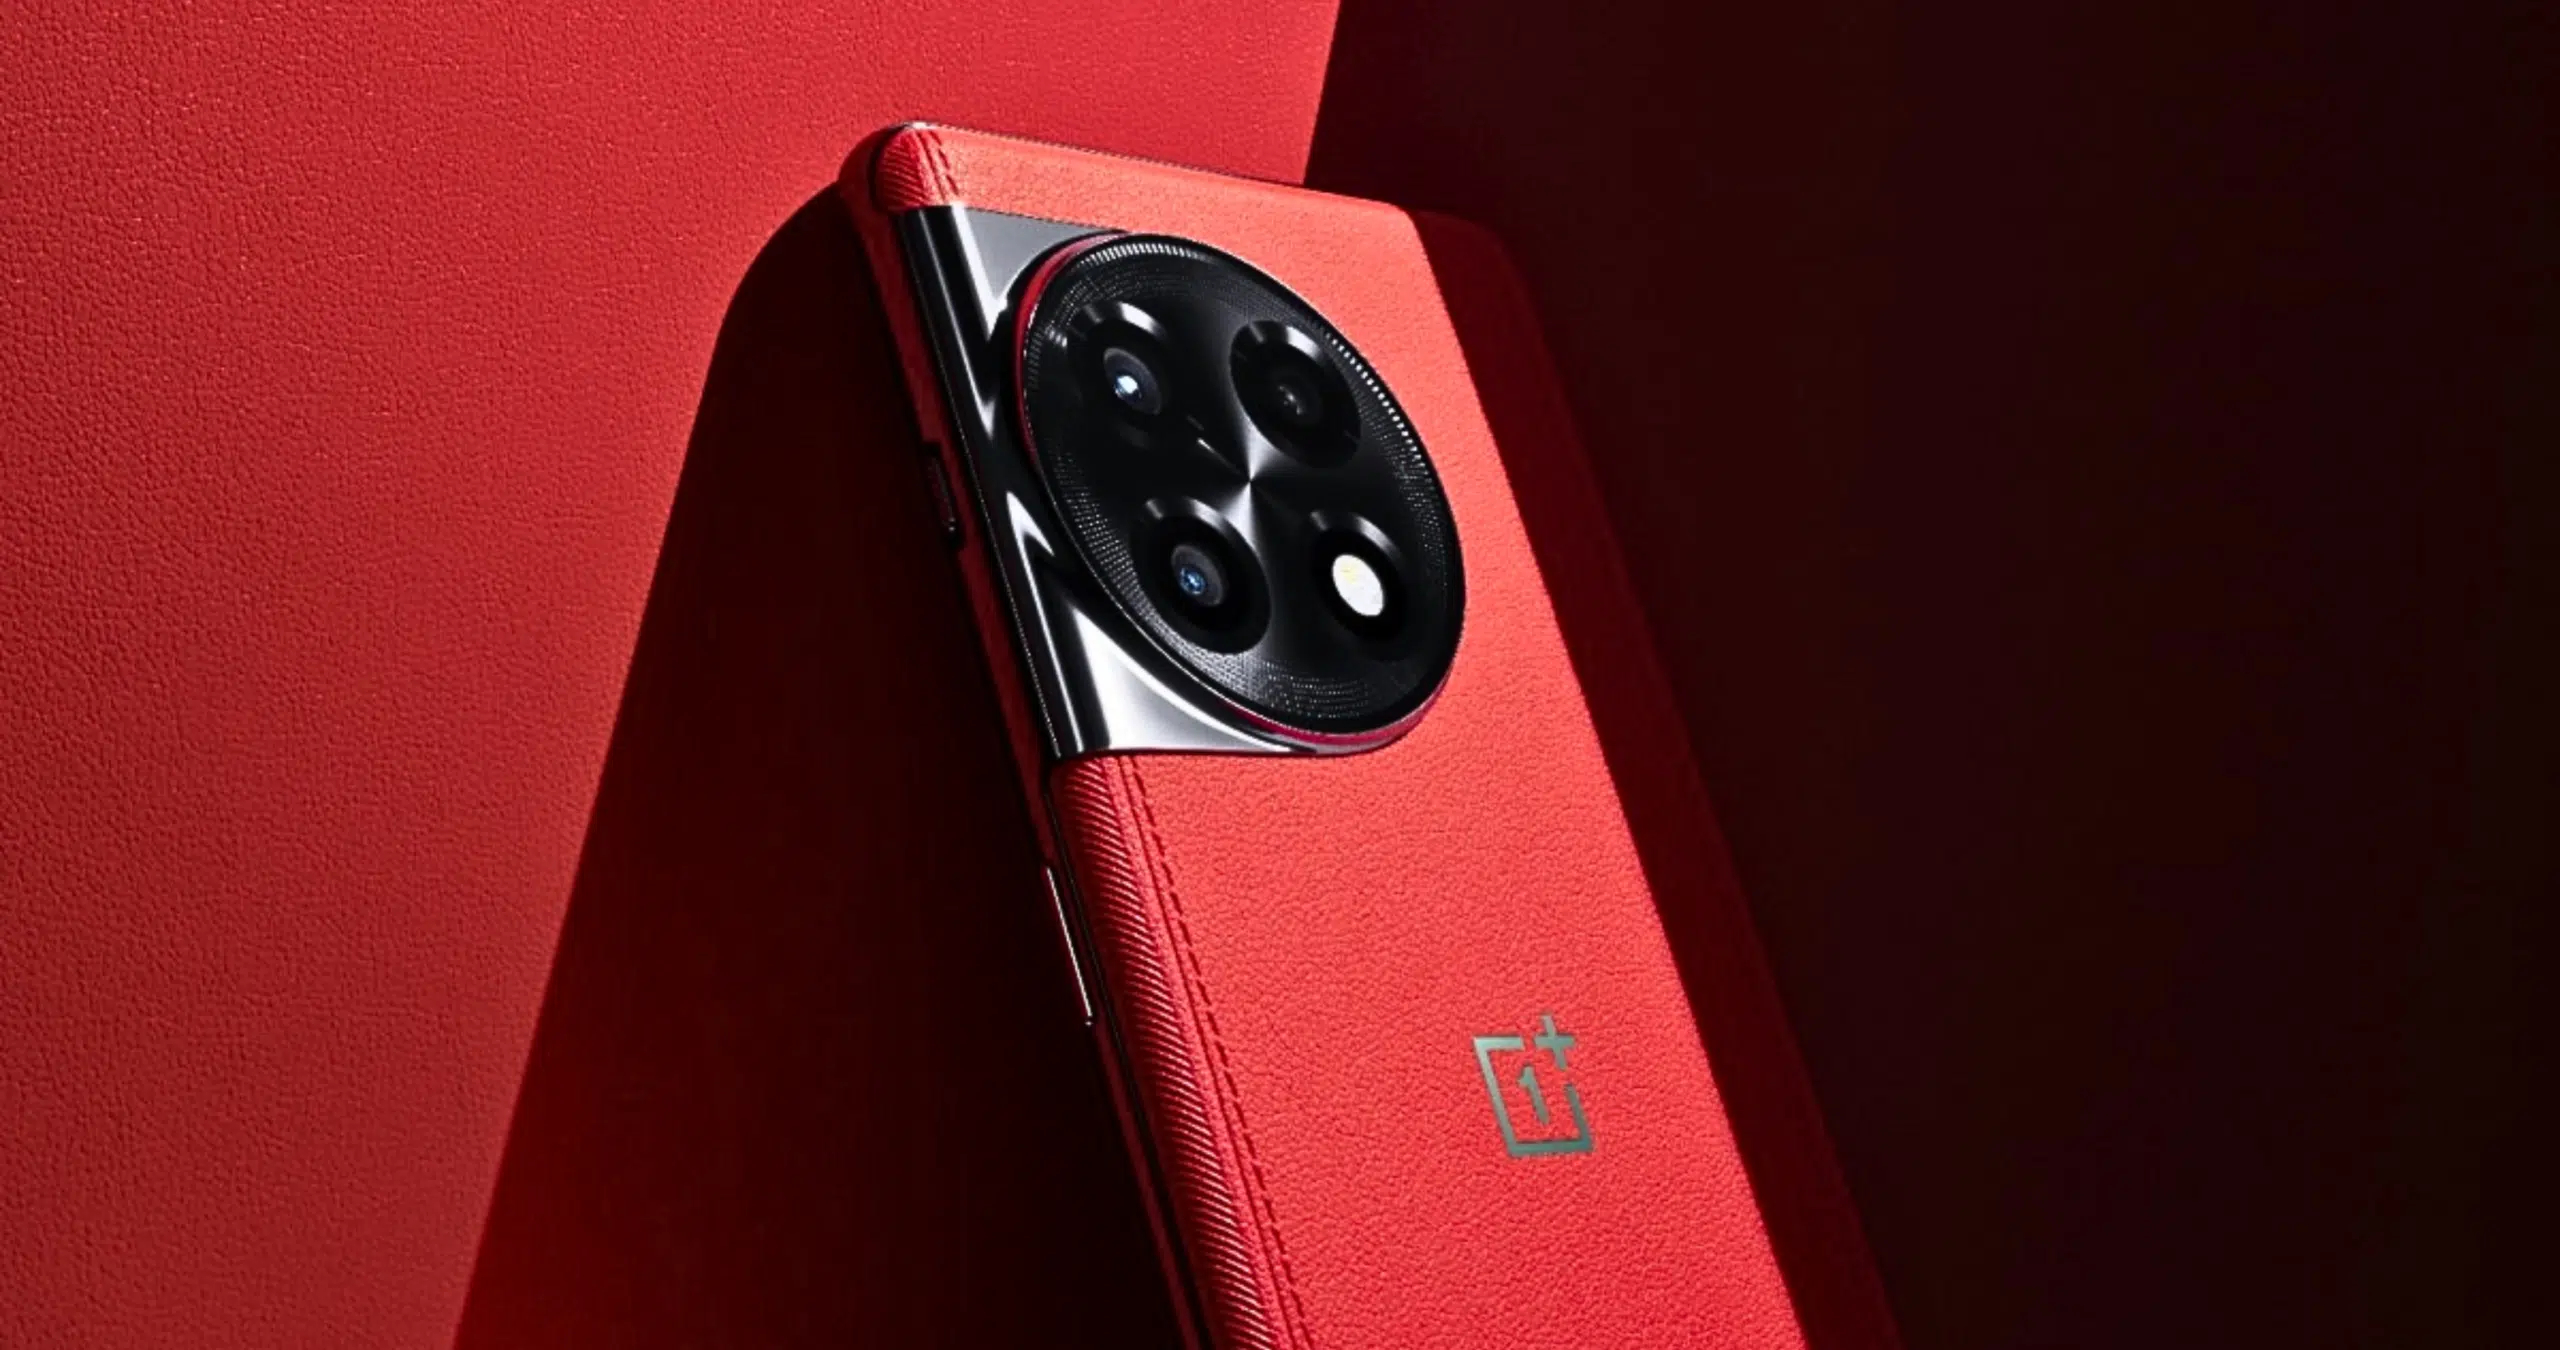 OnePlus Ace 2 Red Vegan leather edition launched in China